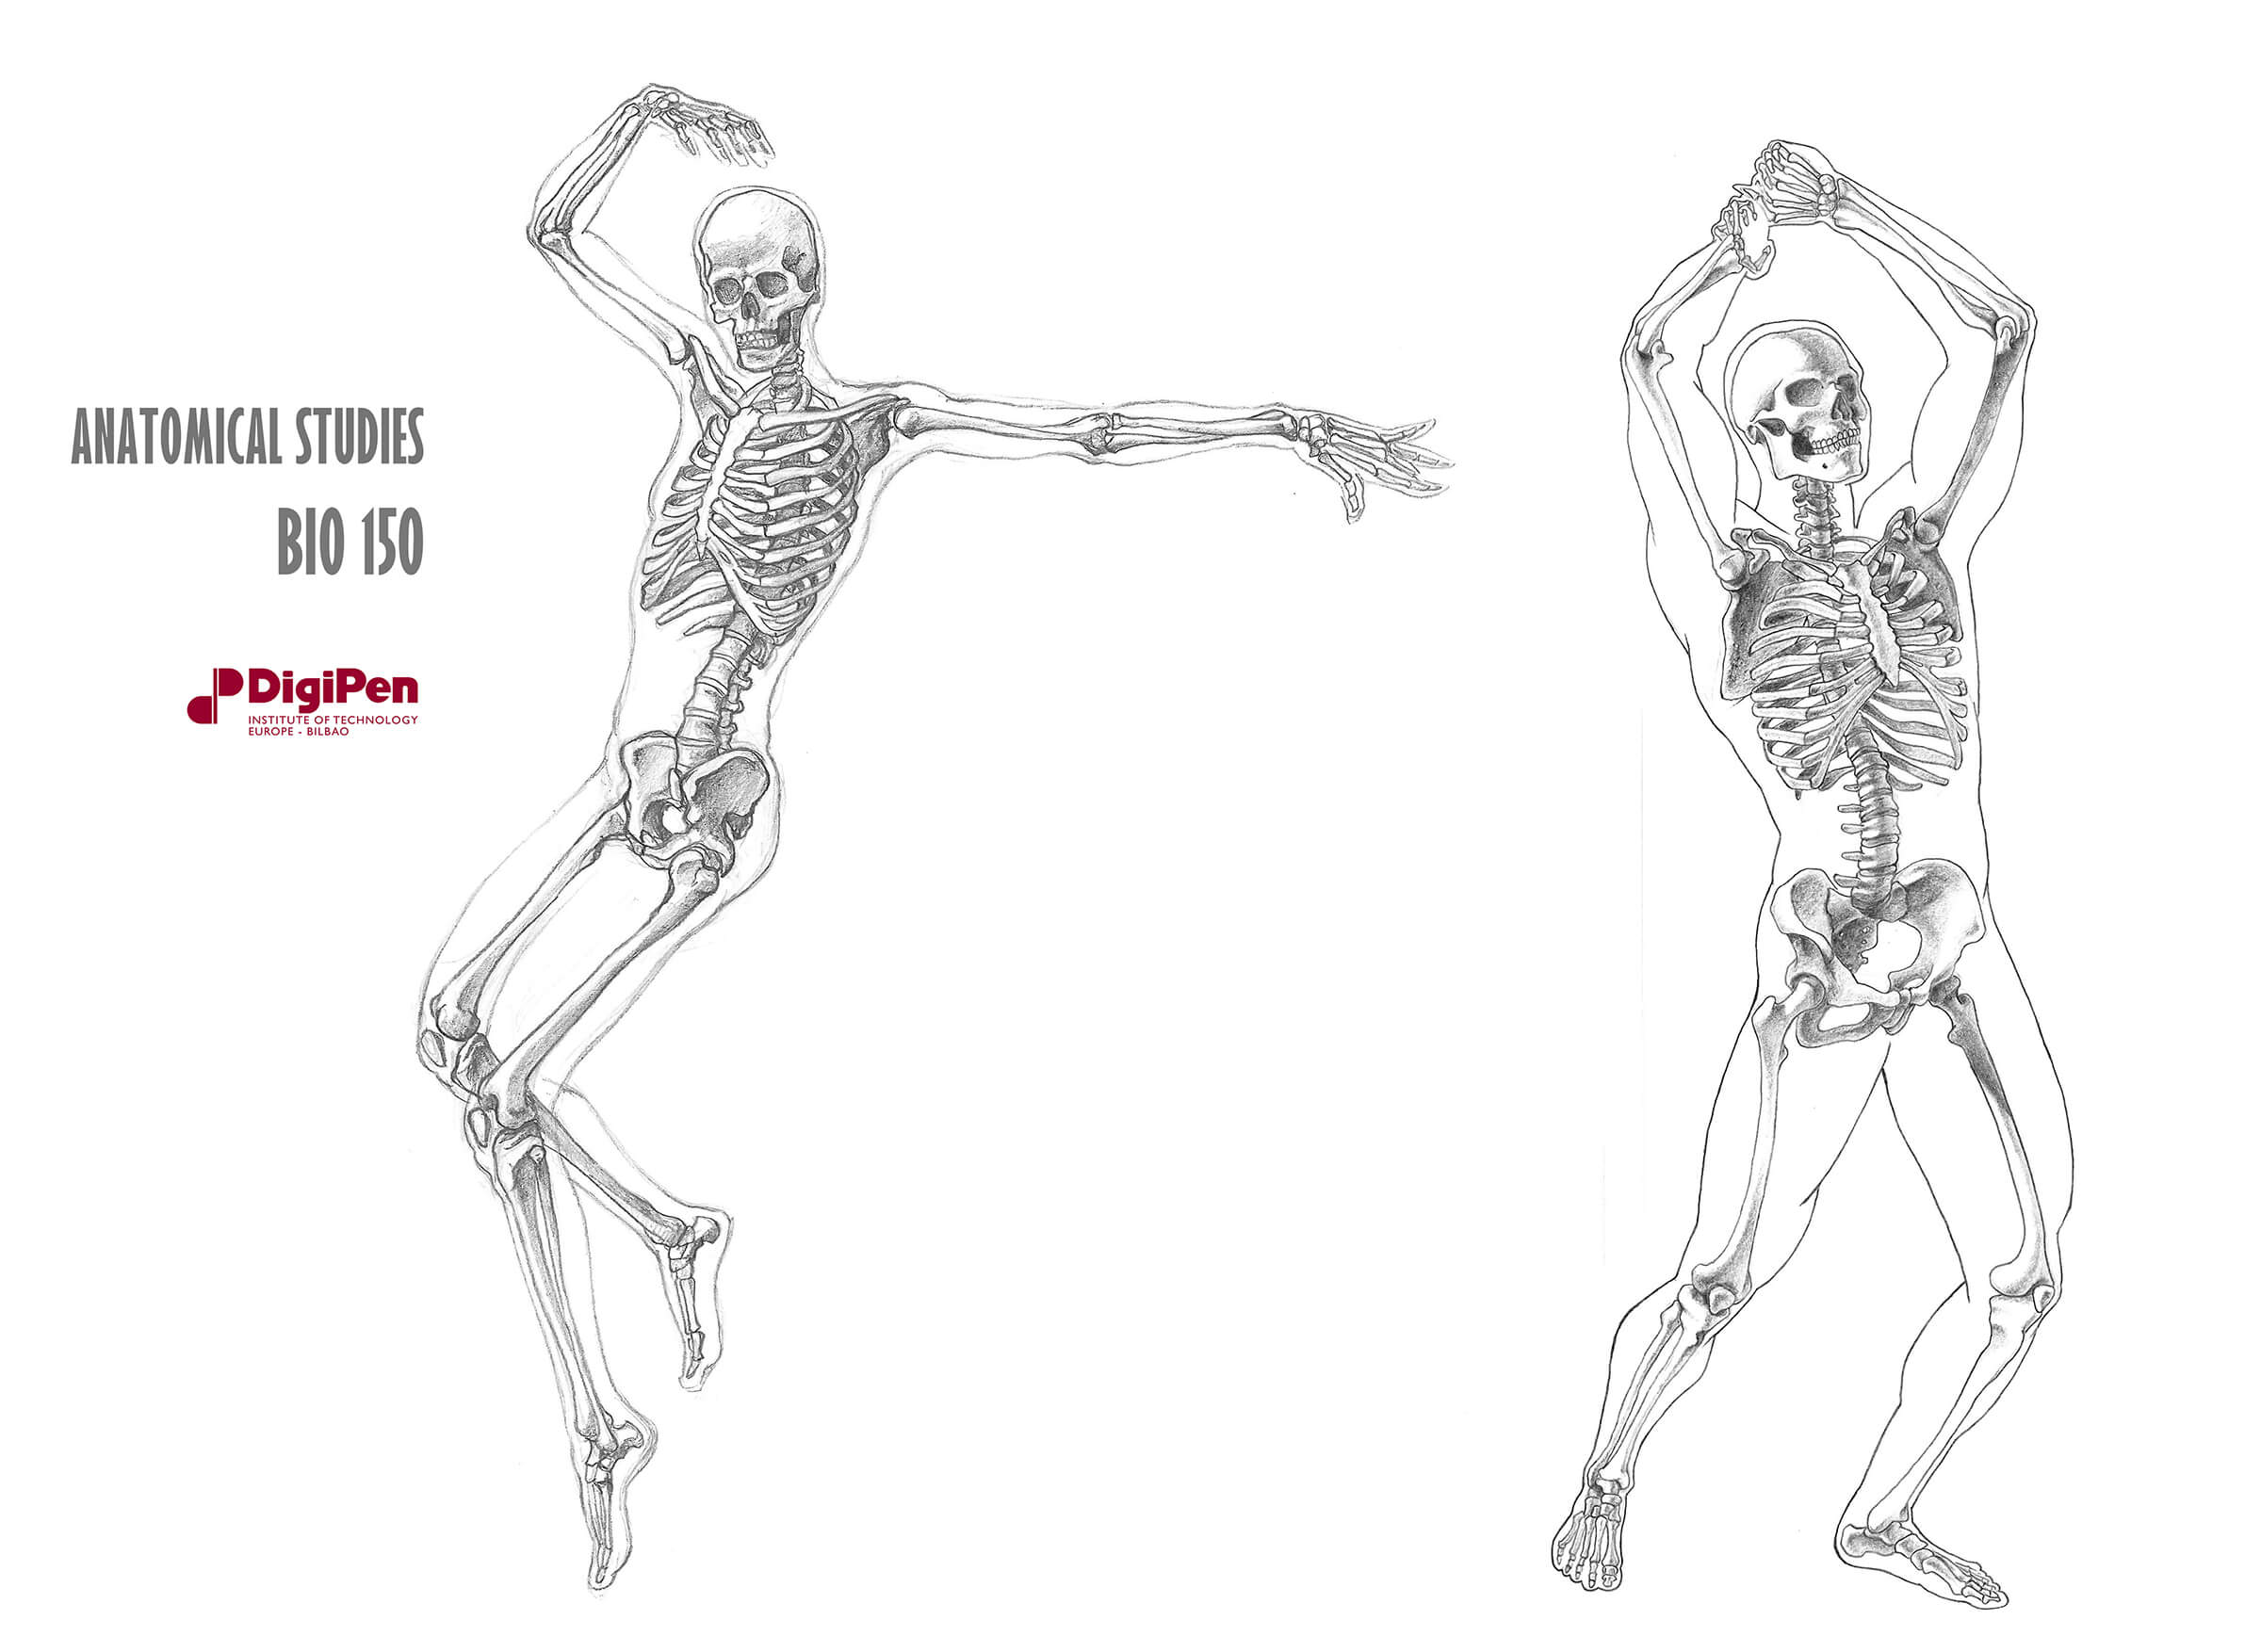 Black-and-white anatomical sketches of two human skeletons, one in a dancing pose, the other pantomiming lifting an ax.